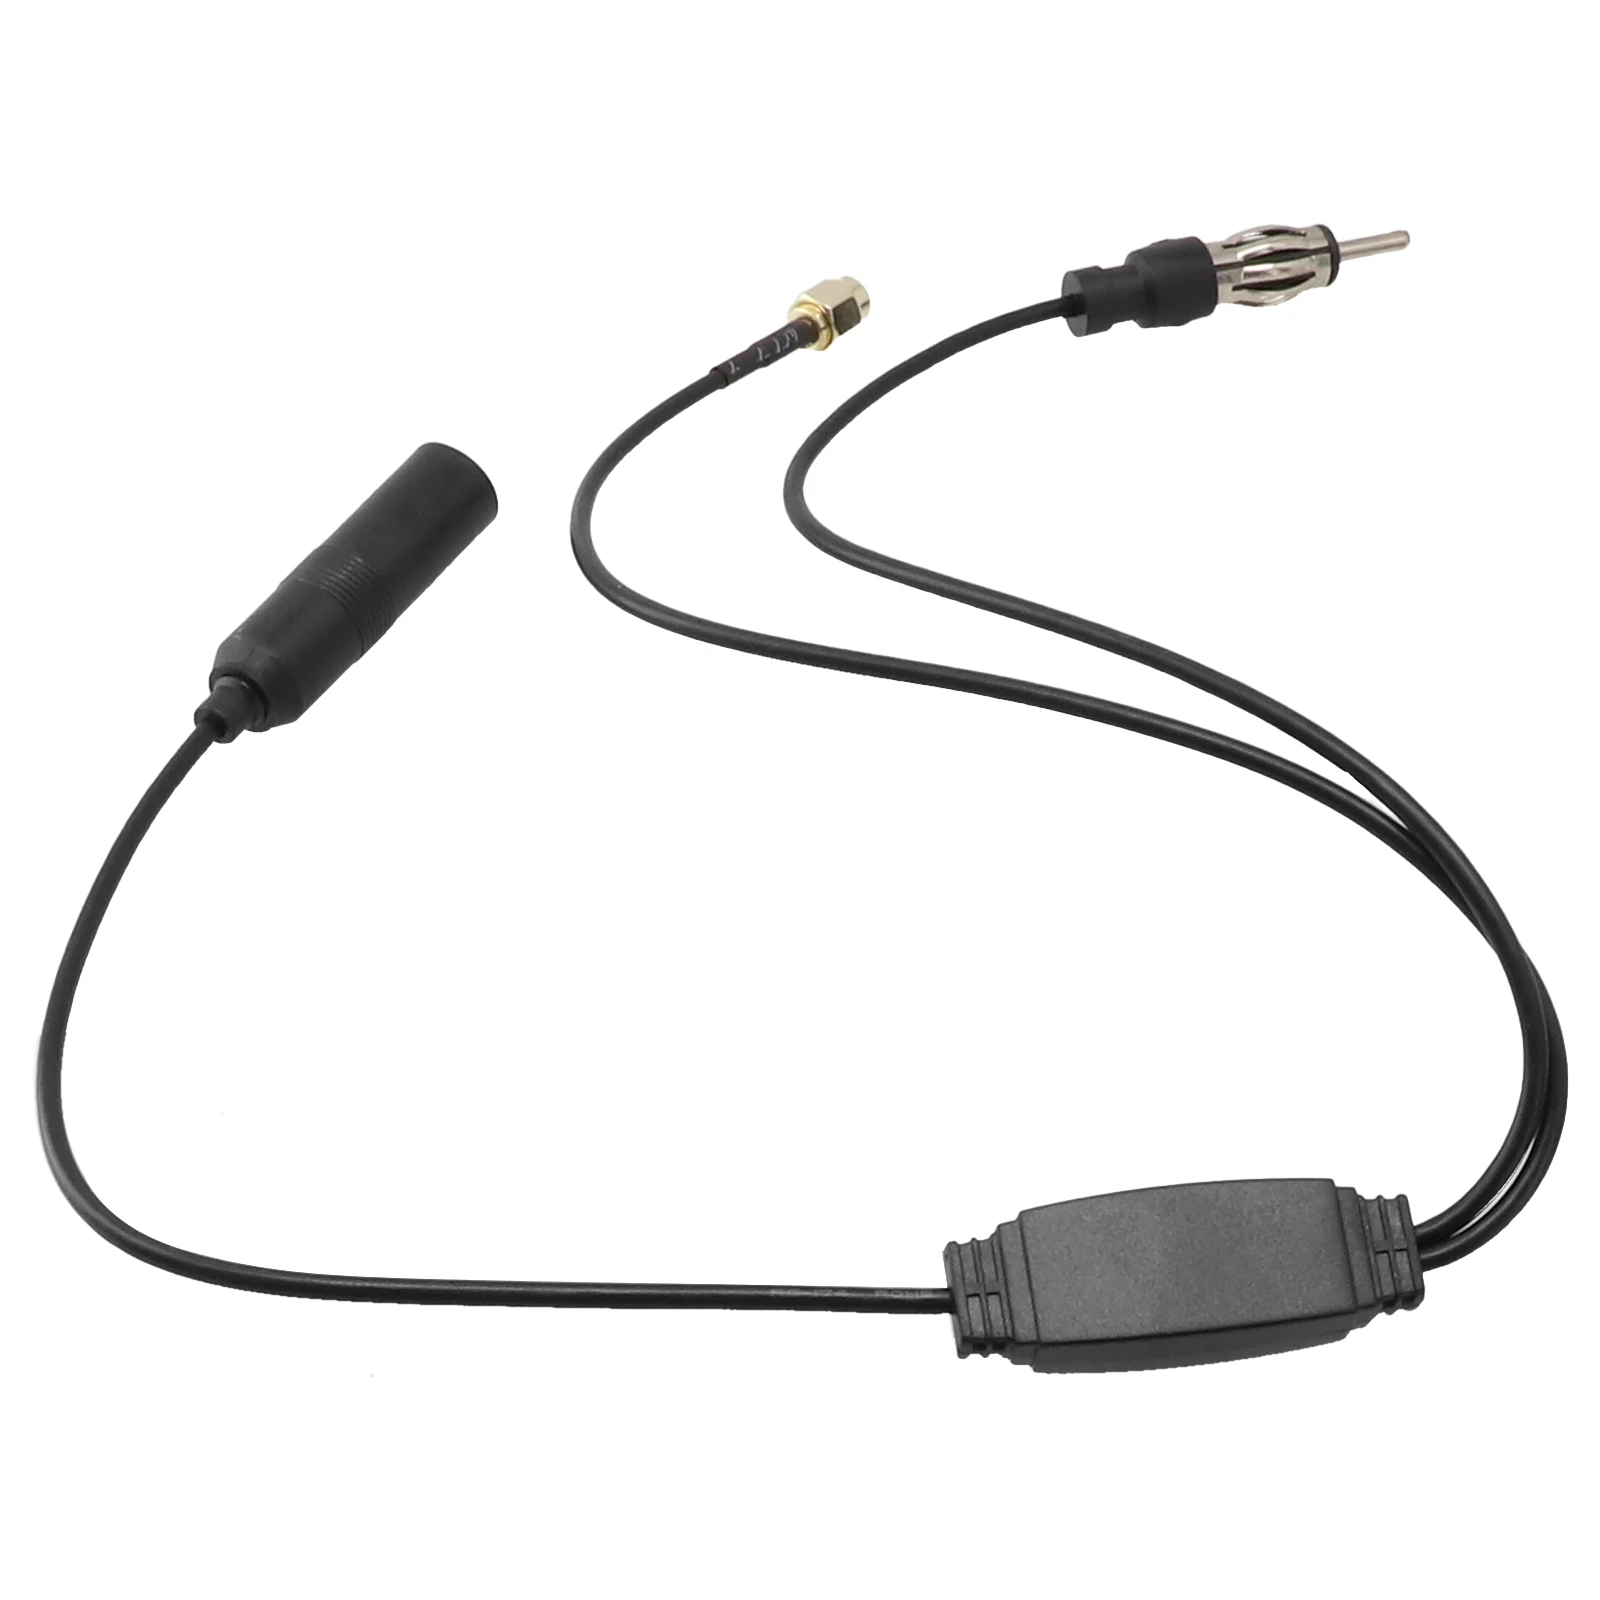 

Efficient Car Radio Antenna Splitter Adapter Cable with Active Aerial Converter for FM/AM DAB+ and SMA Converter